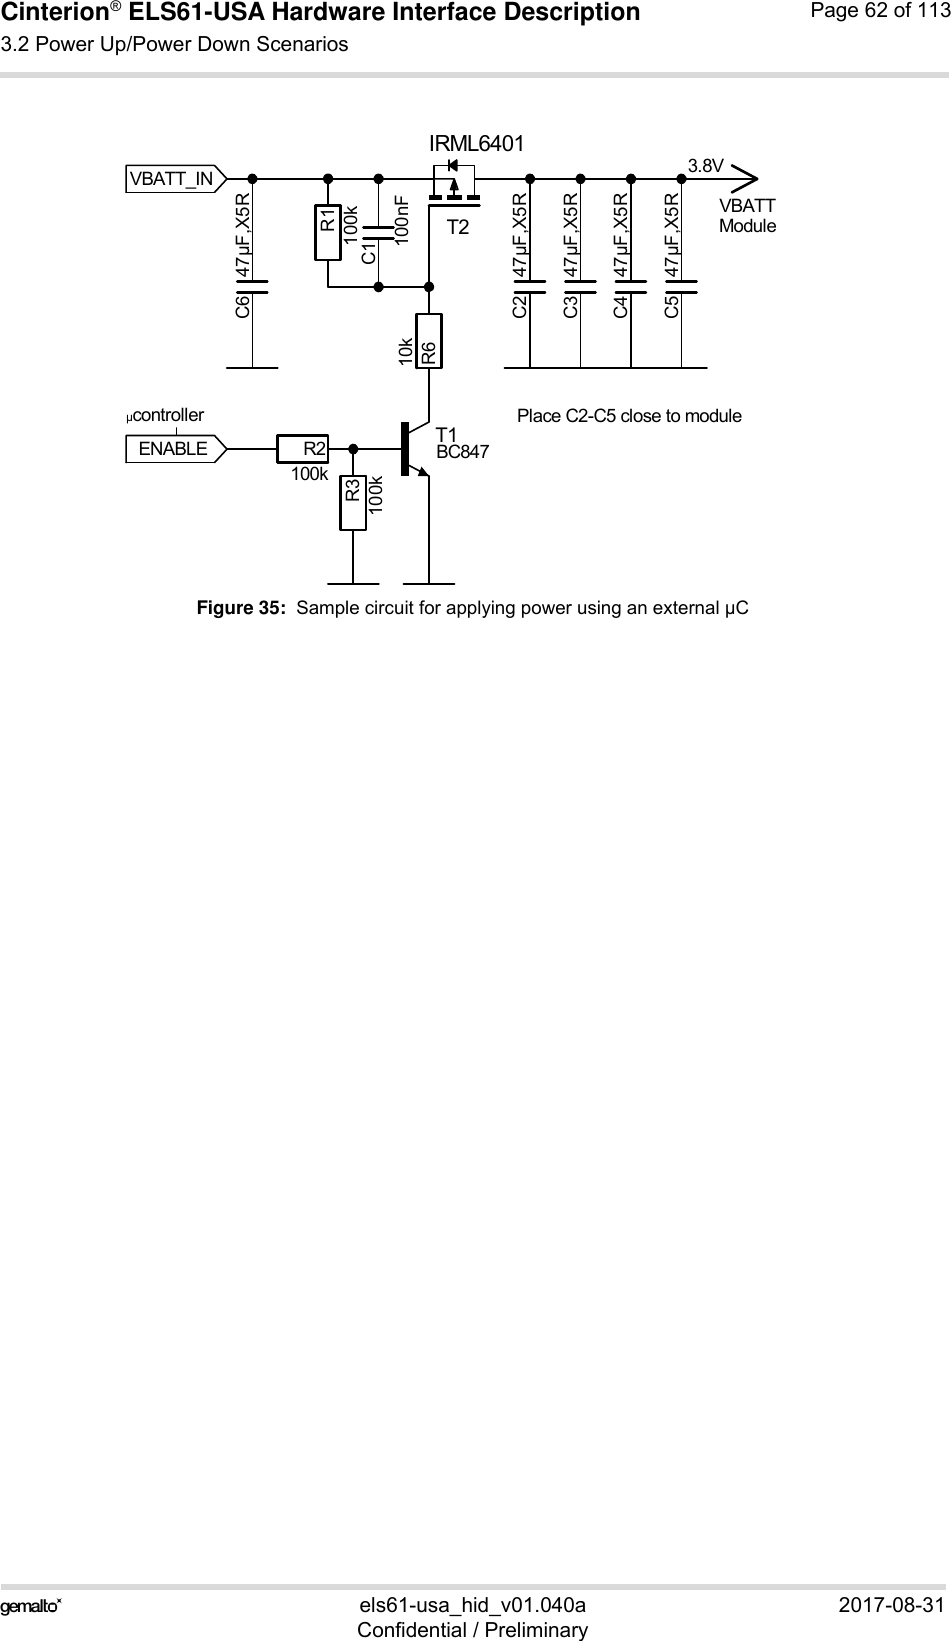 Cinterion® ELS61-USA Hardware Interface Description3.2 Power Up/Power Down Scenarios83els61-usa_hid_v01.040a 2017-08-31Confidential / PreliminaryPage 62 of 113Figure 35:  Sample circuit for applying power using an external µC3.8VModulePlace C2-C5 close to moduleµcontrollerENABLEVBATTVBATT_INC1100nFC2 47µF,X5RC3 47µF,X5RC4 47µF,X5RC5 47µF,X5RC6 47µF,X5RR1100kR2100kR3100kR610kT1T2IRML6401BC847